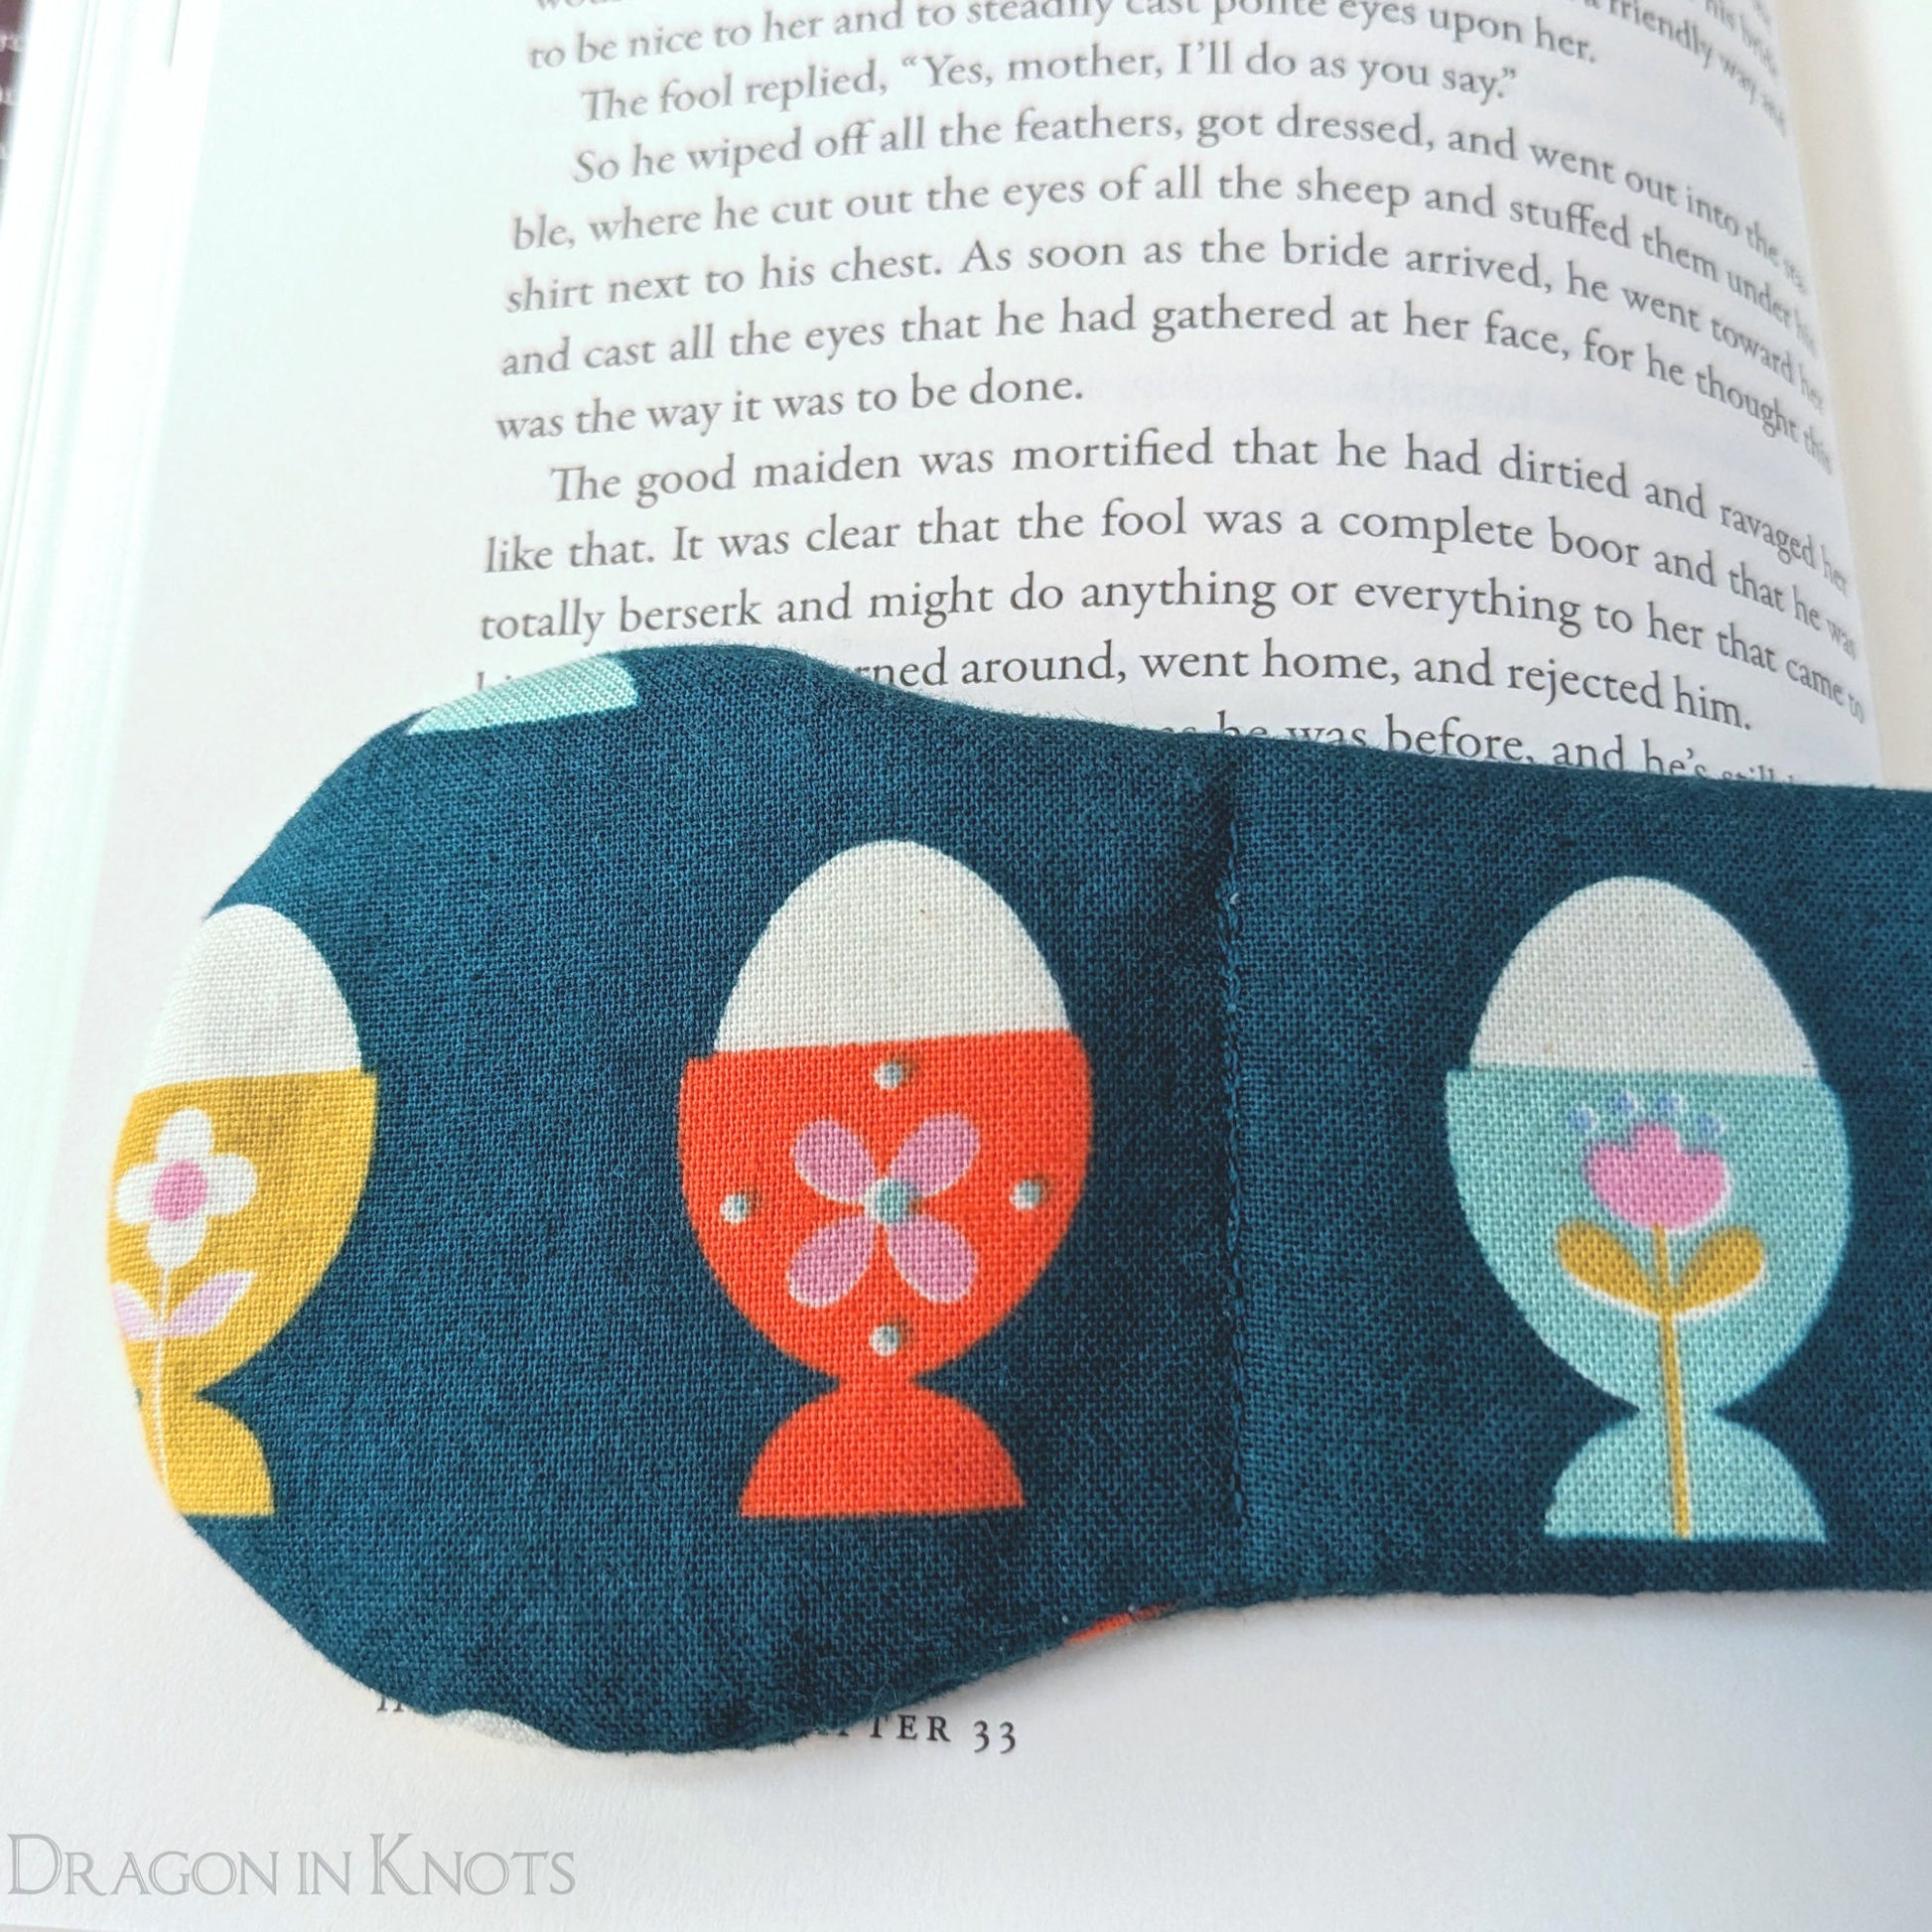 Eggcup Book Weight - Dragon in Knots